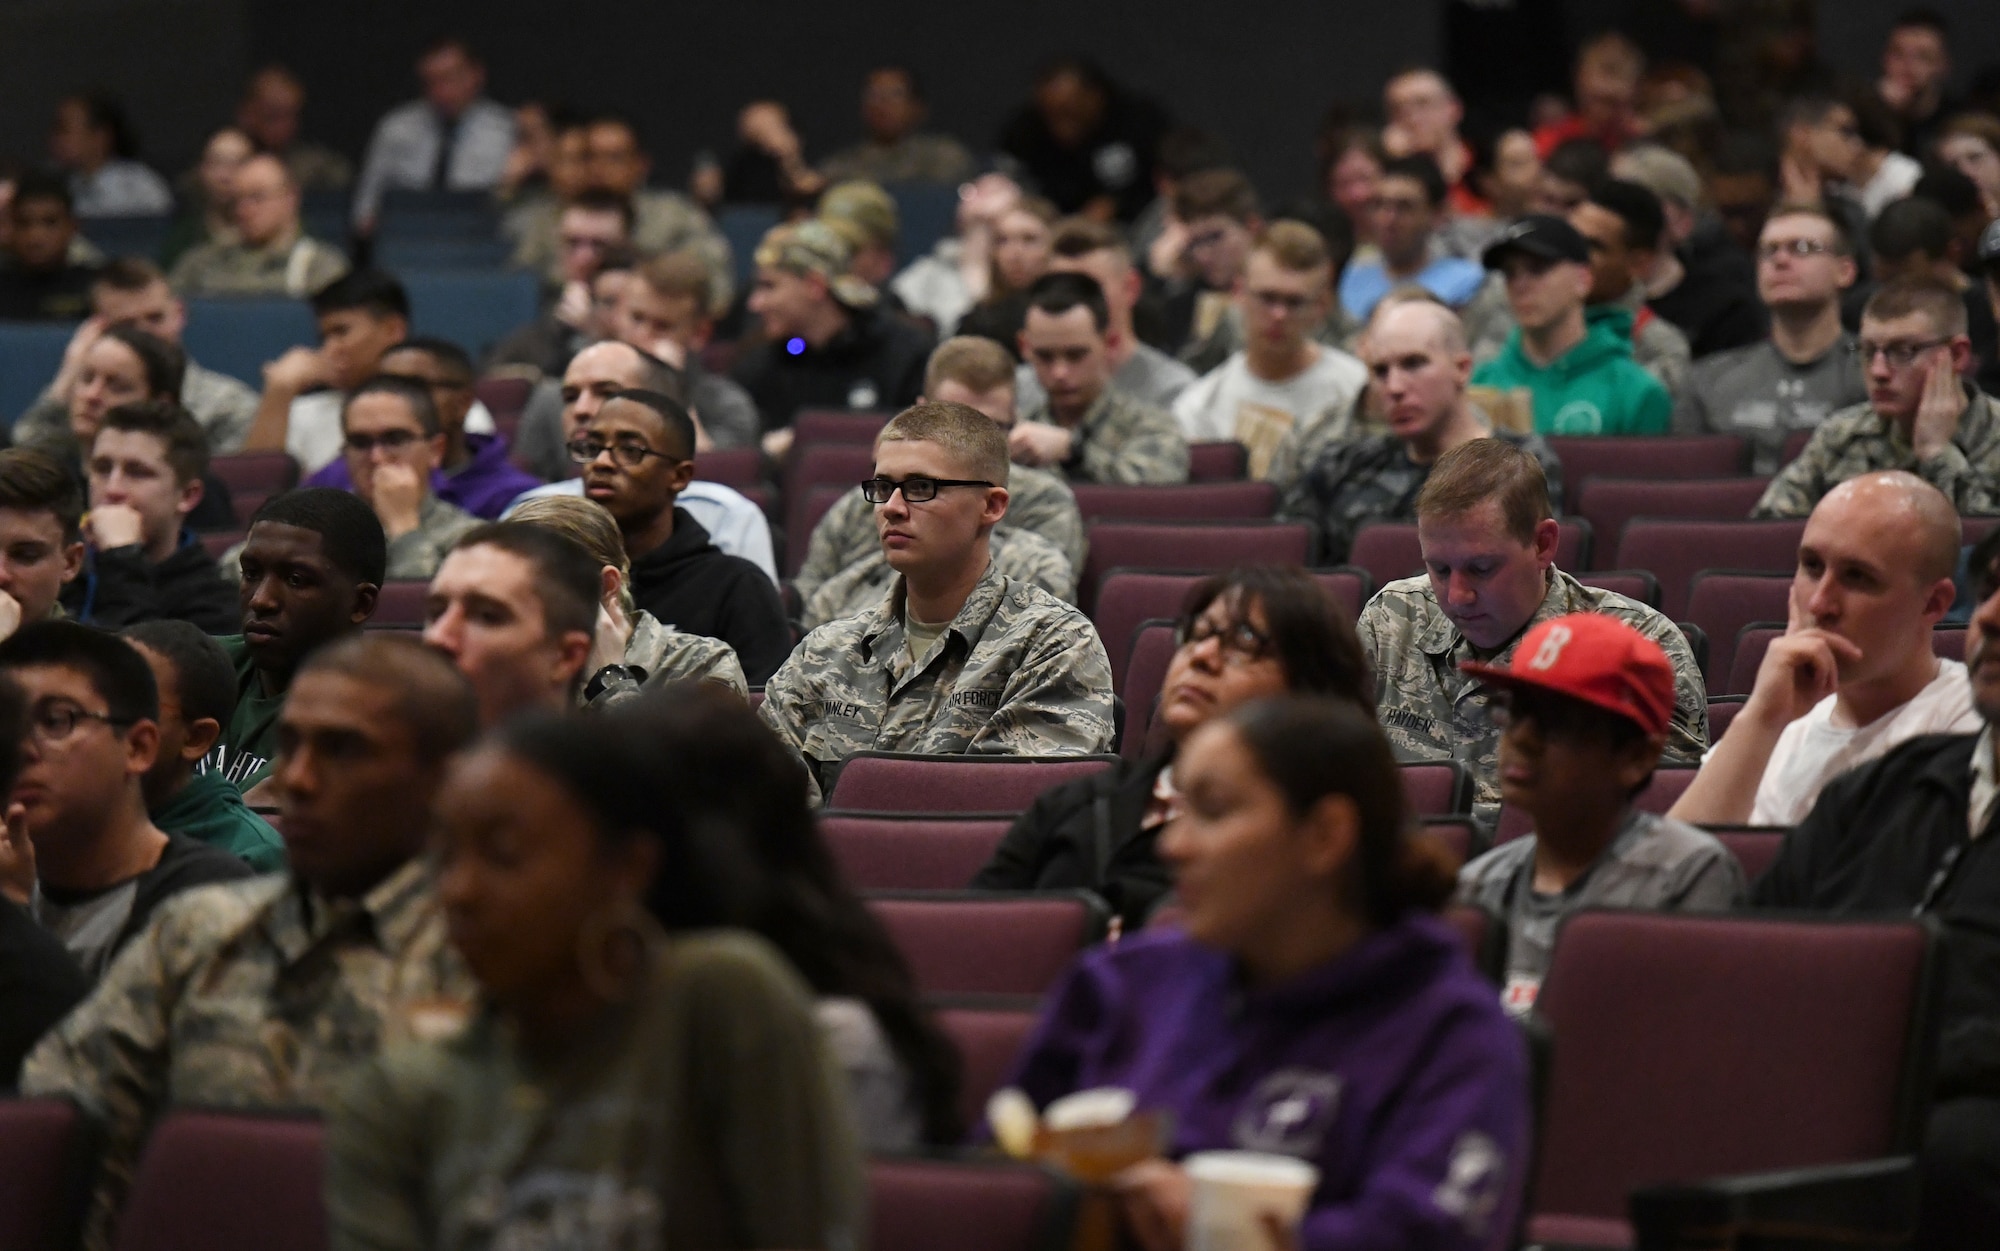 Keesler personnel listen to opening remarks made by Barry Lyons, Biloxi Shuckers Minor League Baseball Team ambassador, prior to the playing of the movie, 42, inside the Welch Theater at Keesler Air Force Base, Mississippi, Feb. 21, 2019. The movie, a story of Jackie Robinson's rise to fame in Major League Baseball, was shown in celebration for Black History Month. Lyons played 14 years of professional baseball to include seven years in the major leagues. Keesler hosted several events throughout the month to include a 5K run, luncheon, movies and will conclude with a close-out celebration Feb. 28. The events are meant to help Keesler personnel to remember, educate and celebrate black history. (U.S. Air Force photo by Kemberly Groue)